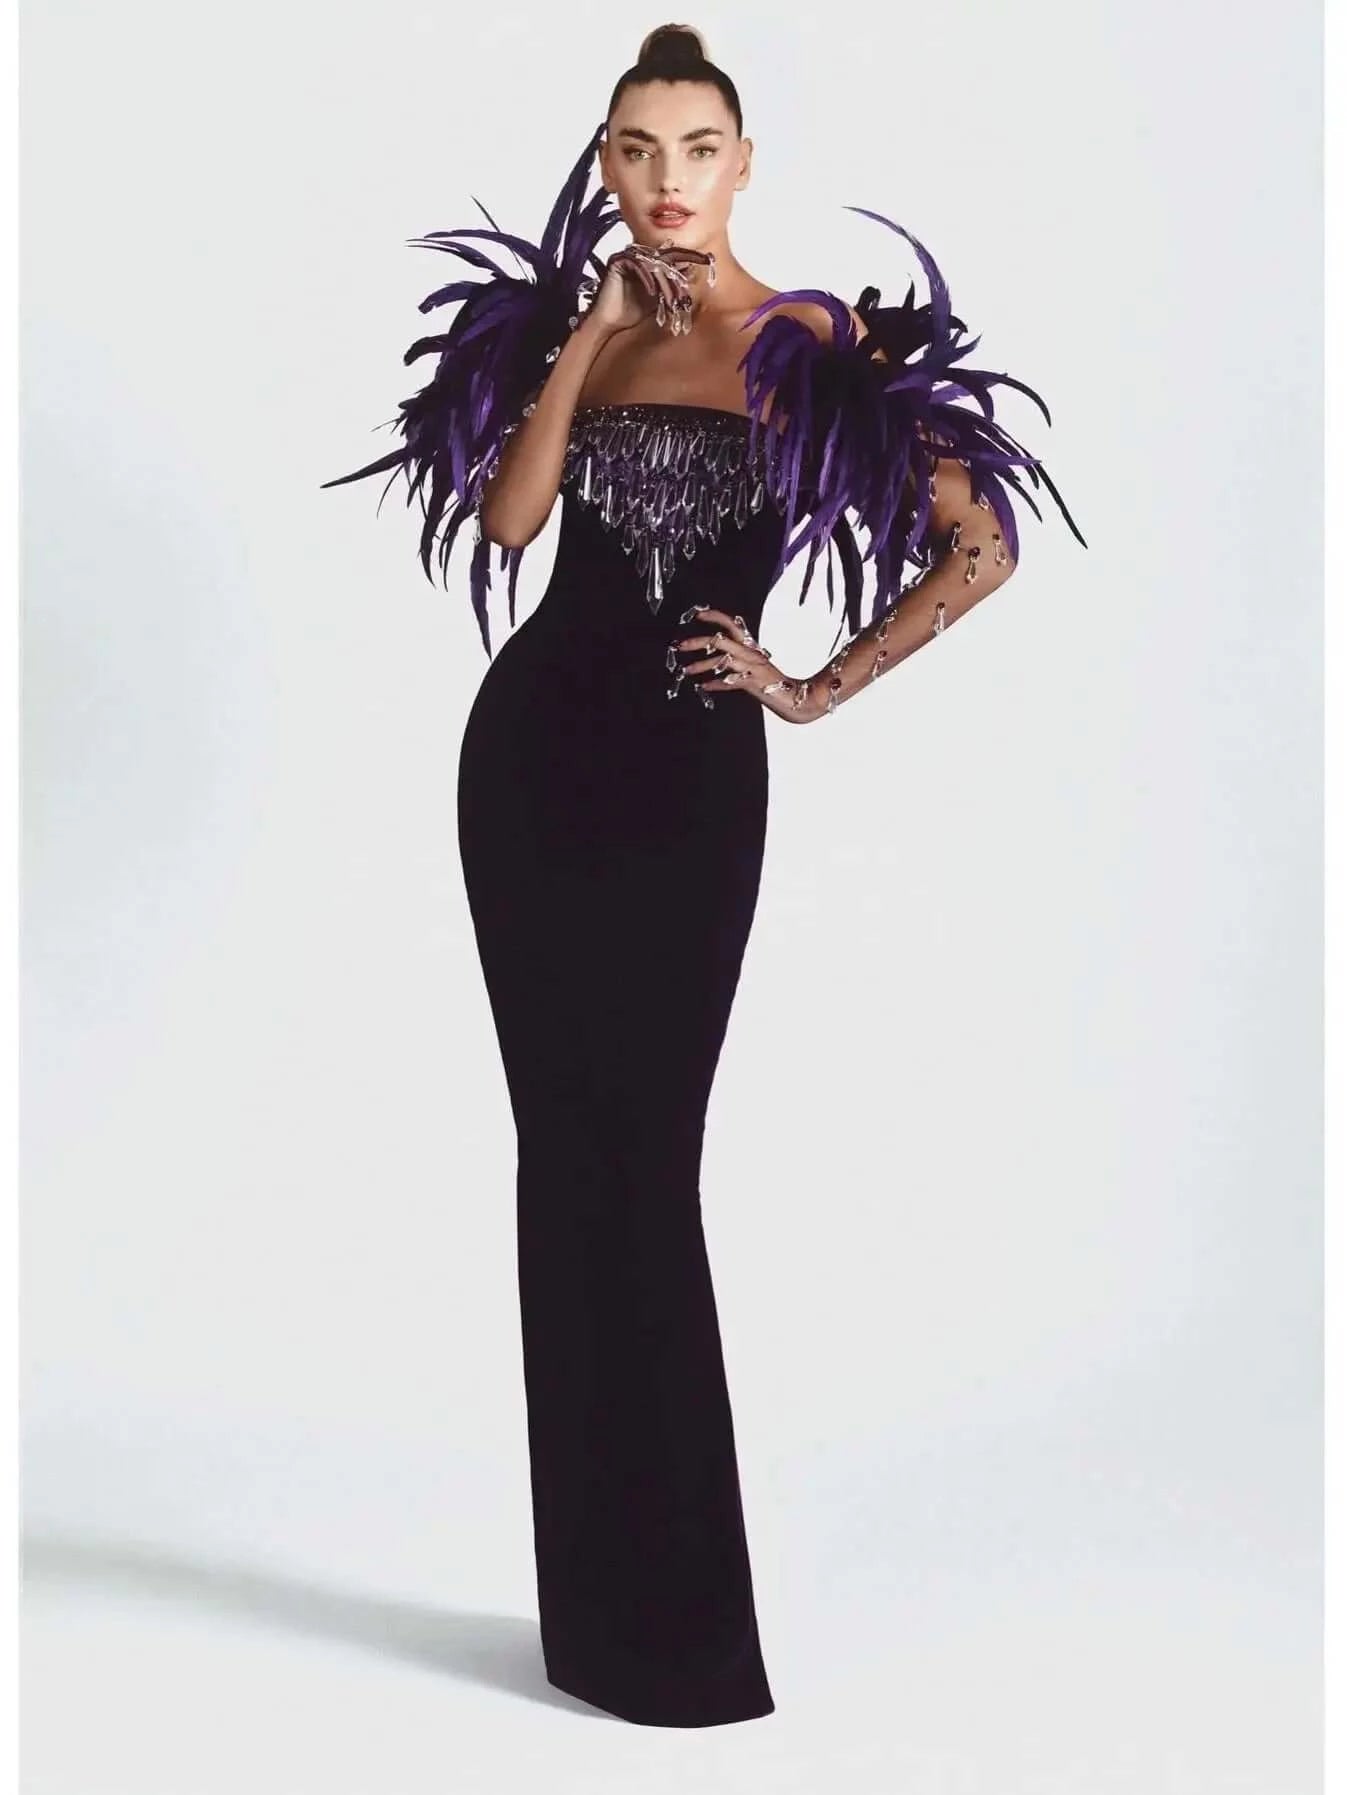 Feather Crystal Purple Velvet Dress With Gloves Valensia Seven